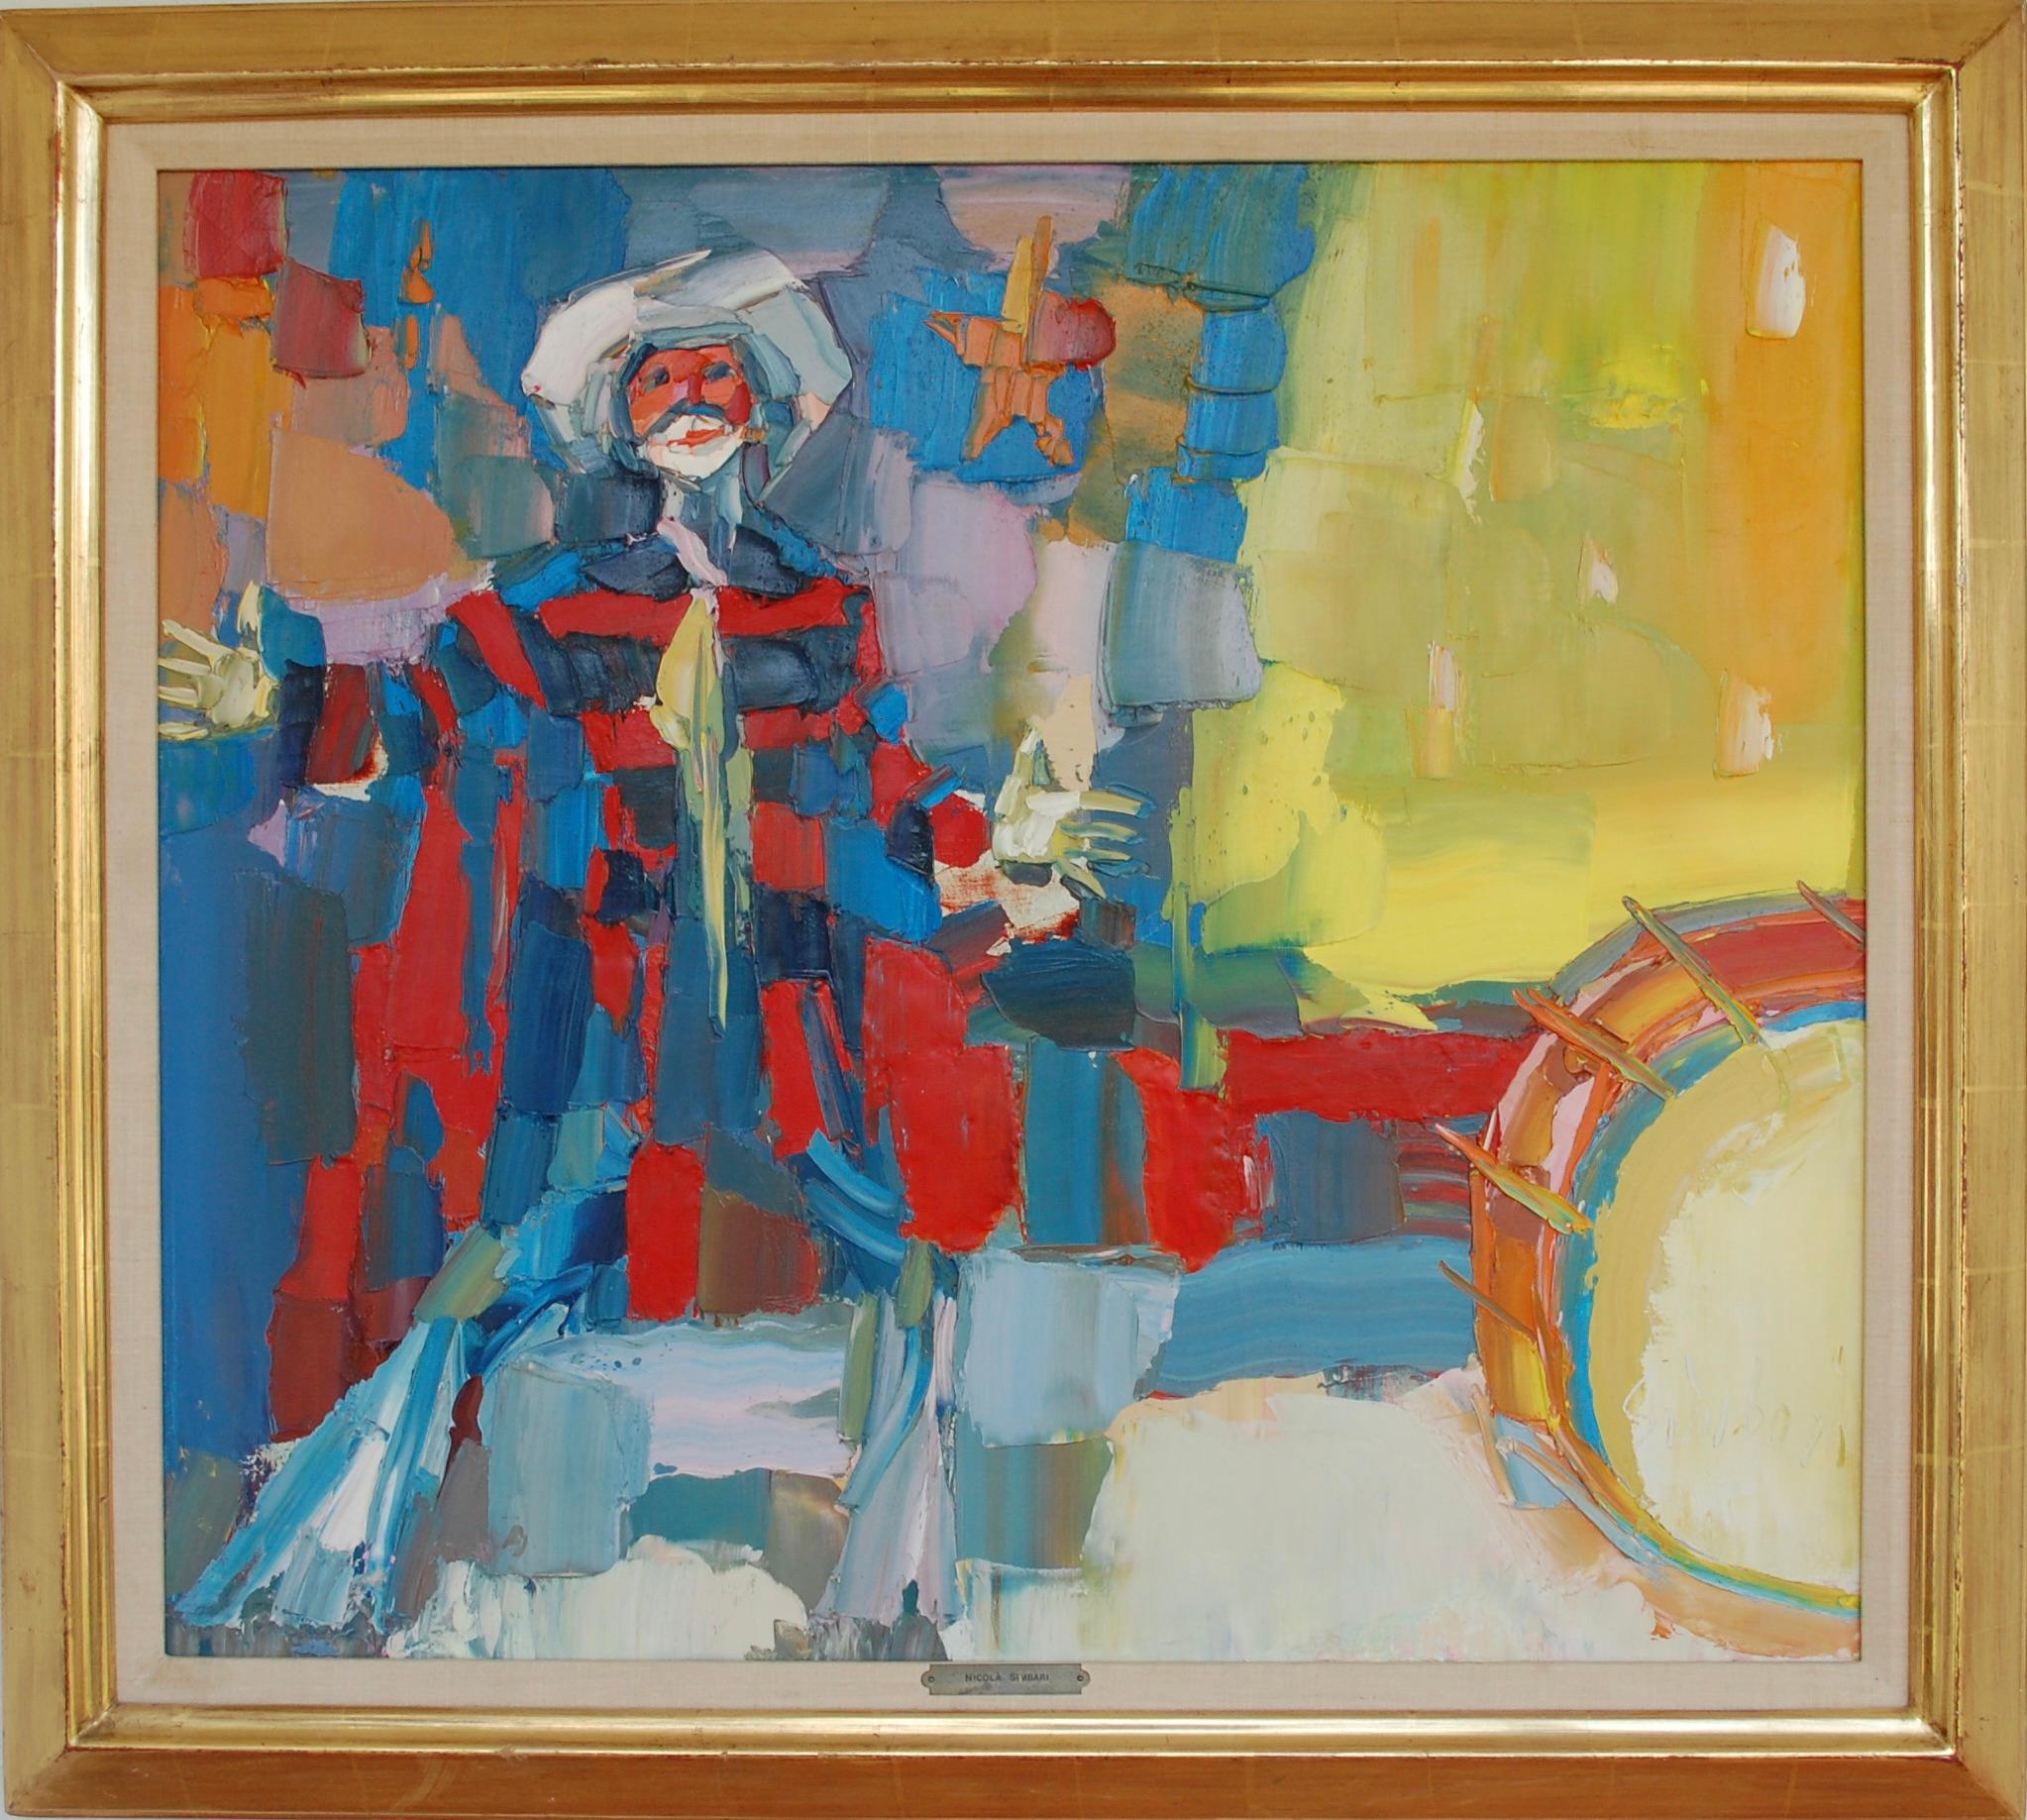 Performer Modern Expressionist Painting by Nicola Simbari